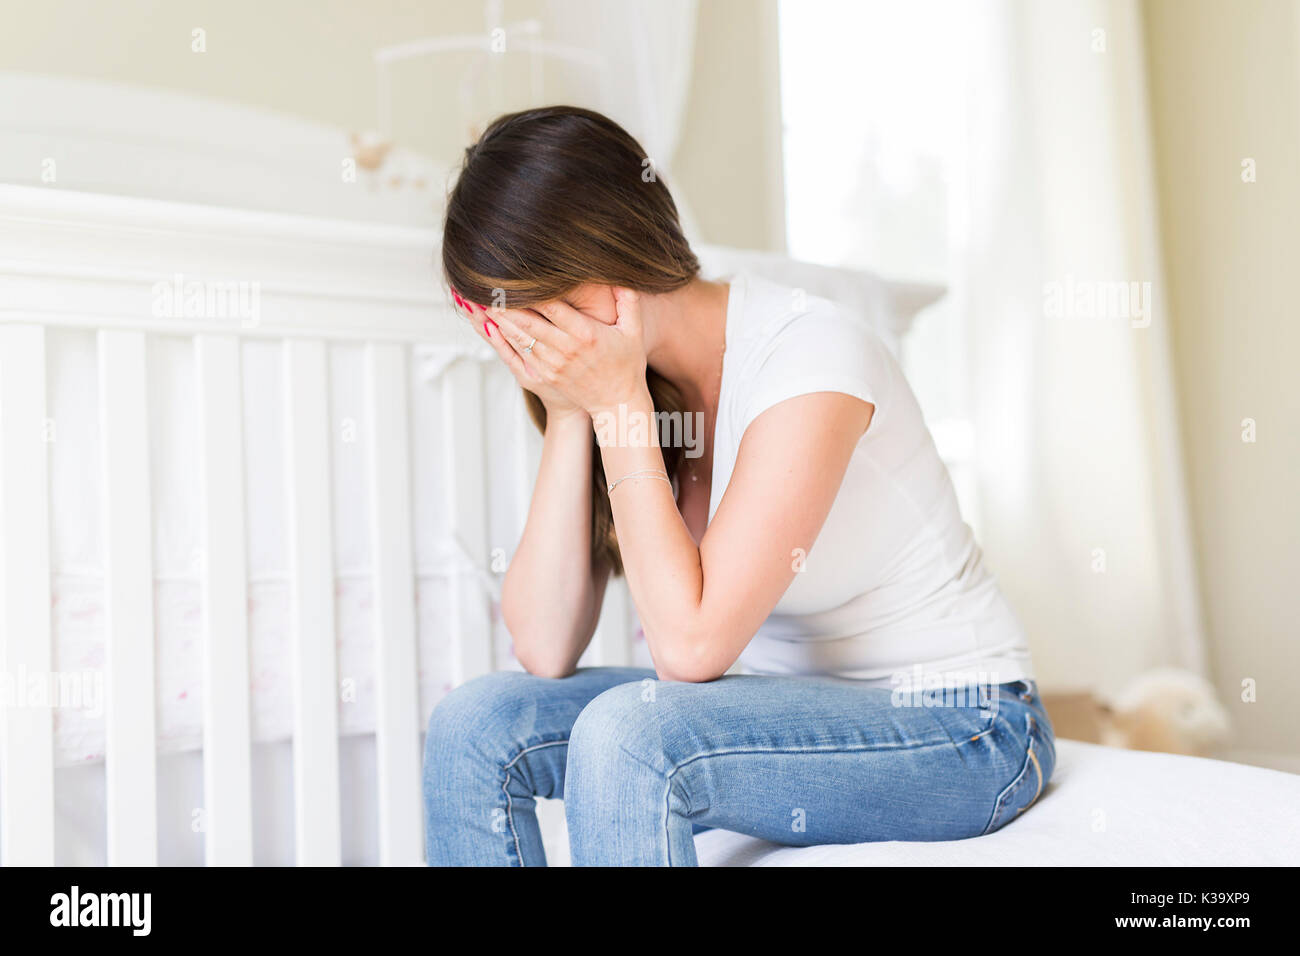 Depressed young woman in baby room Stock Photo